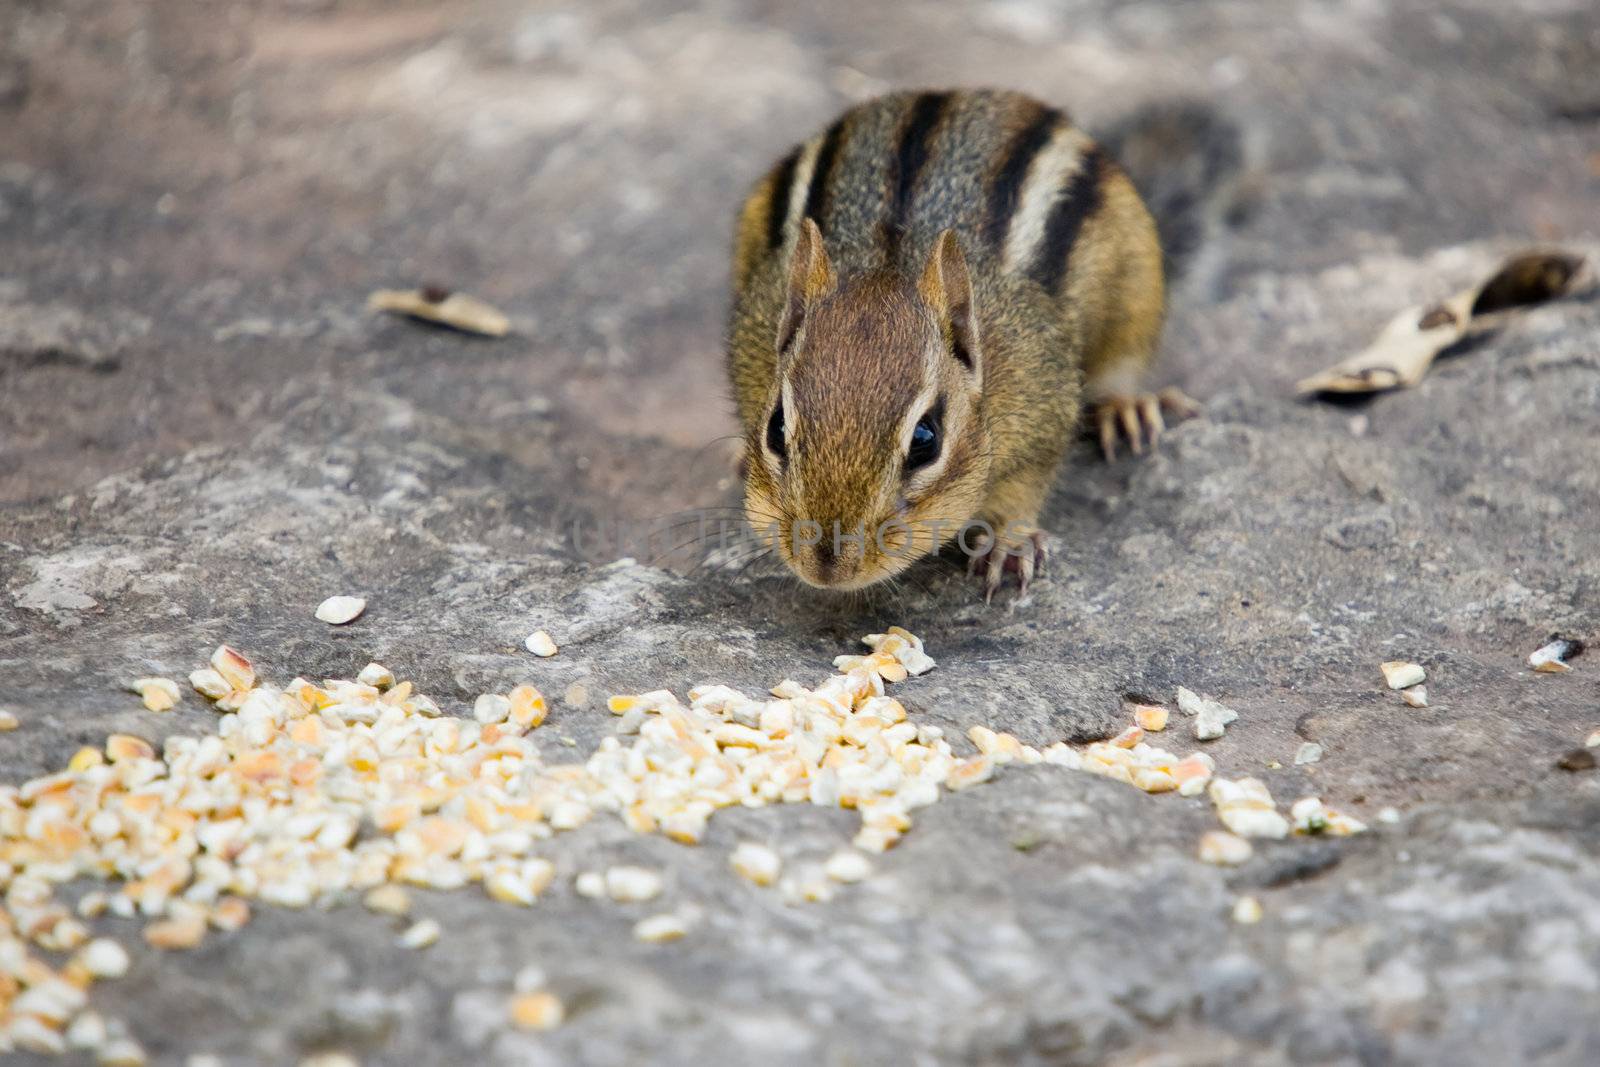 Feast for a Chipmunk by woodygraphs